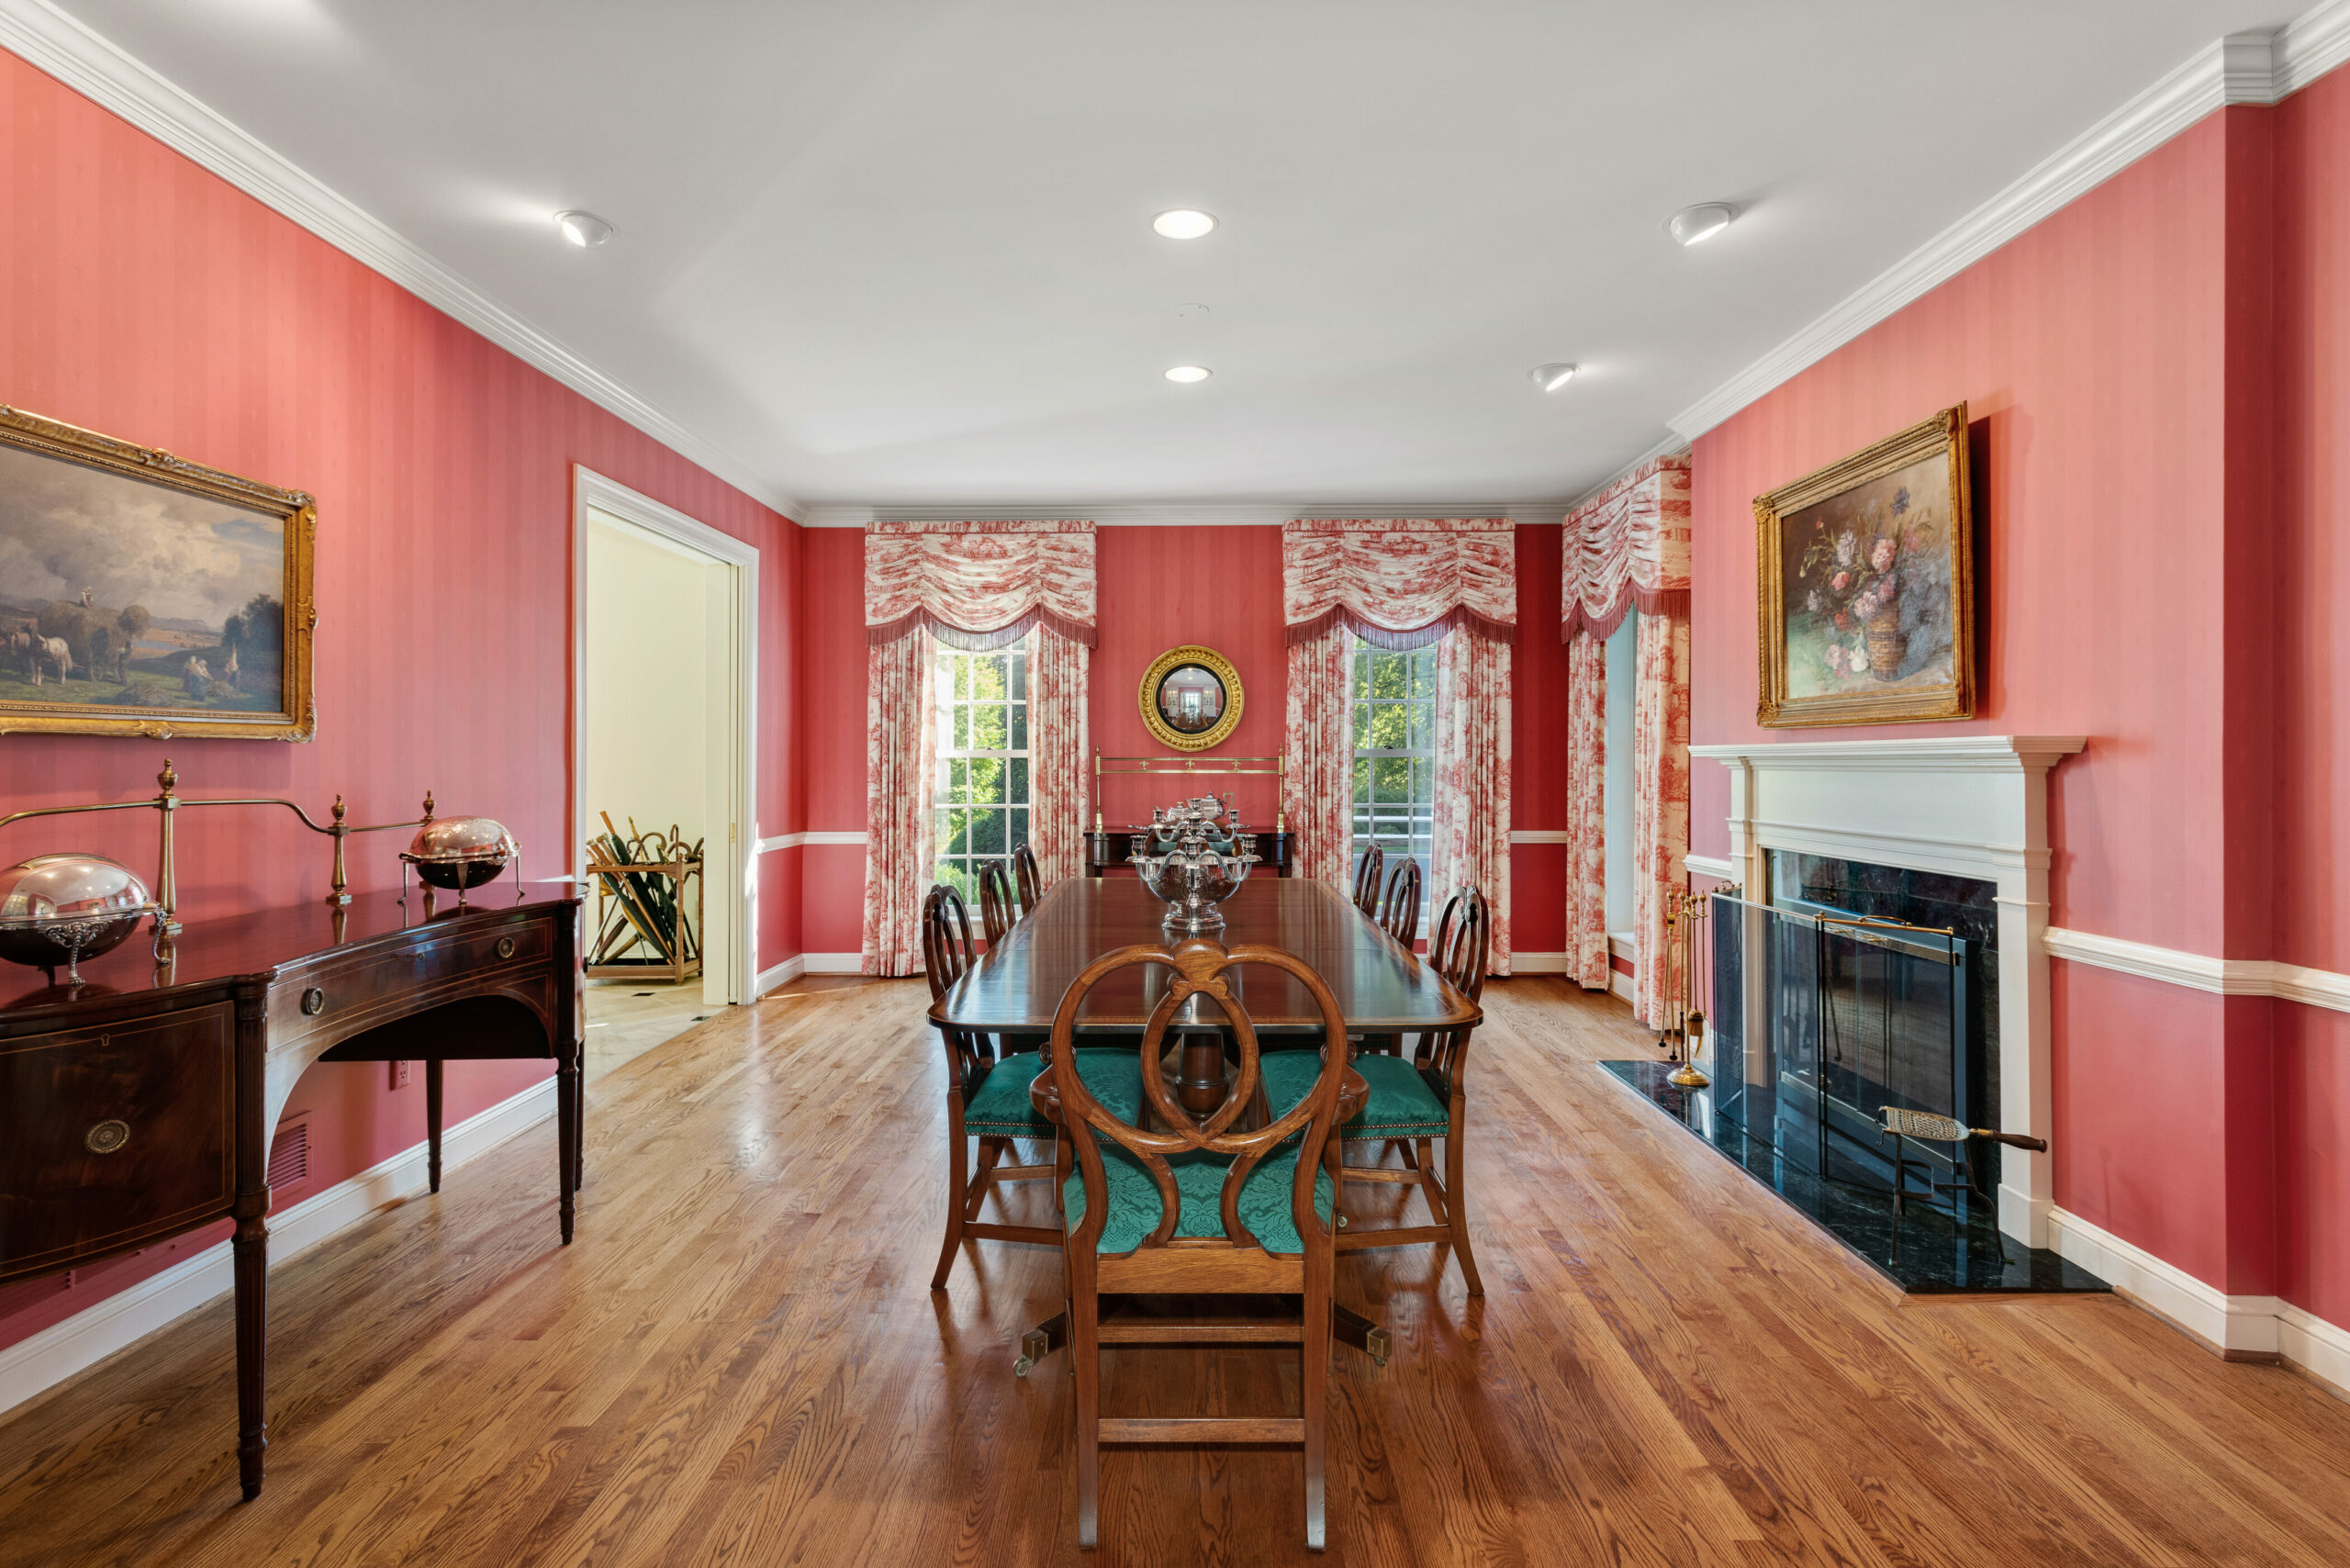 interior view of the dining room with lovely red walls and wood flooring